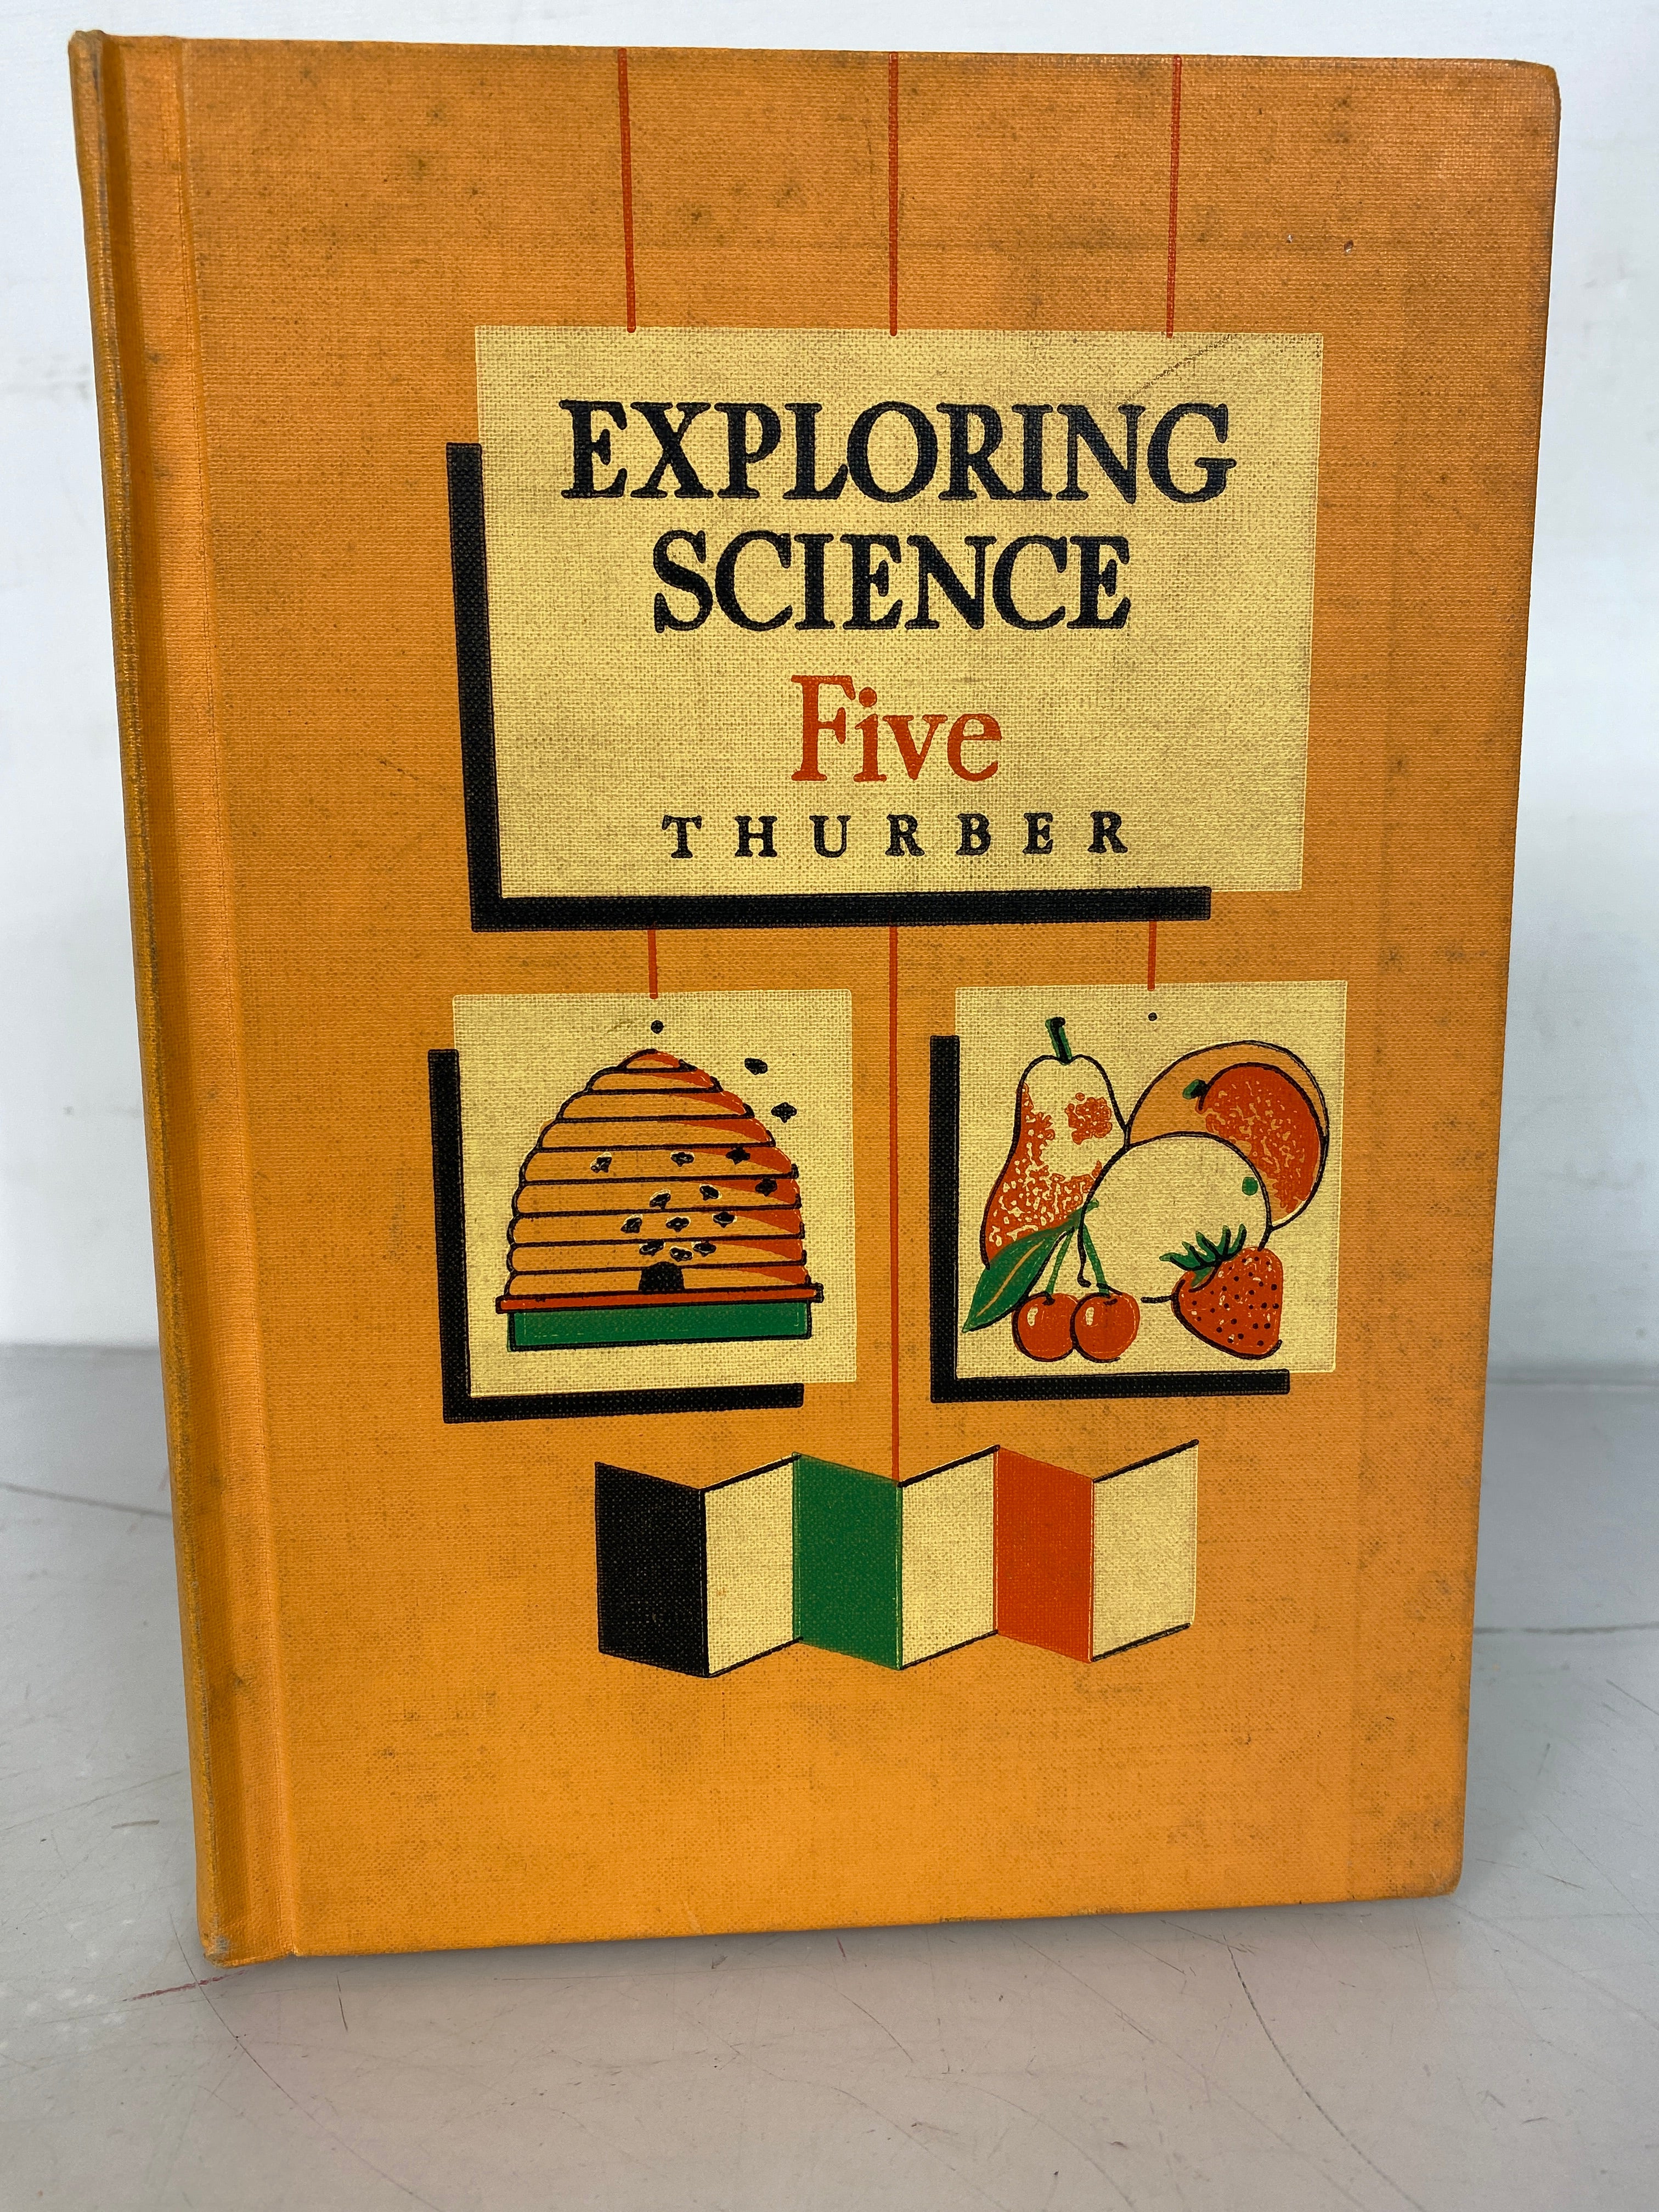 Exploring Science Five by Walter Thurber 1959 HC